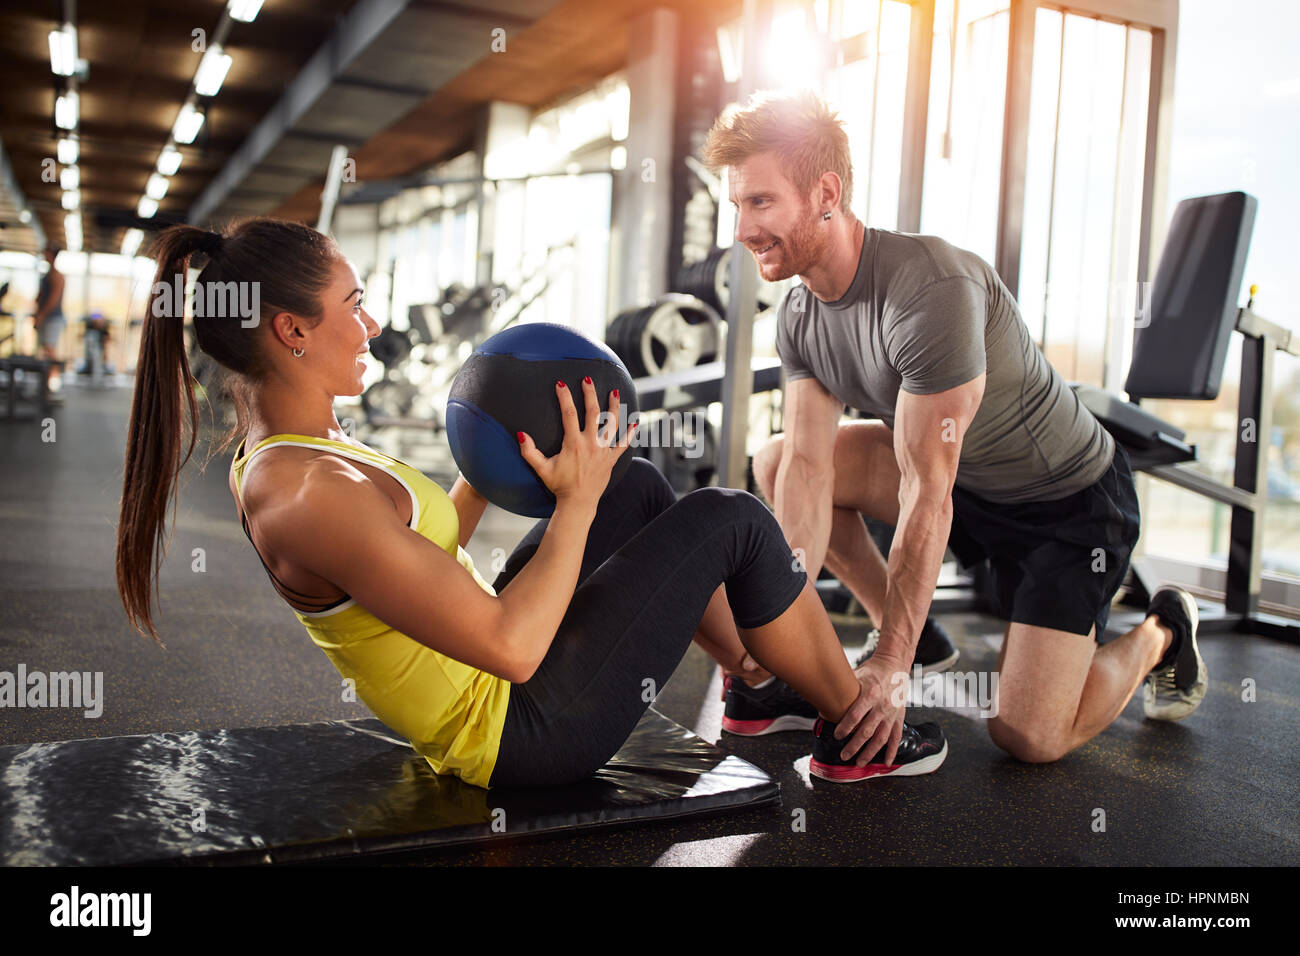 Girl in good shape on fitness training in gym Stock Photo